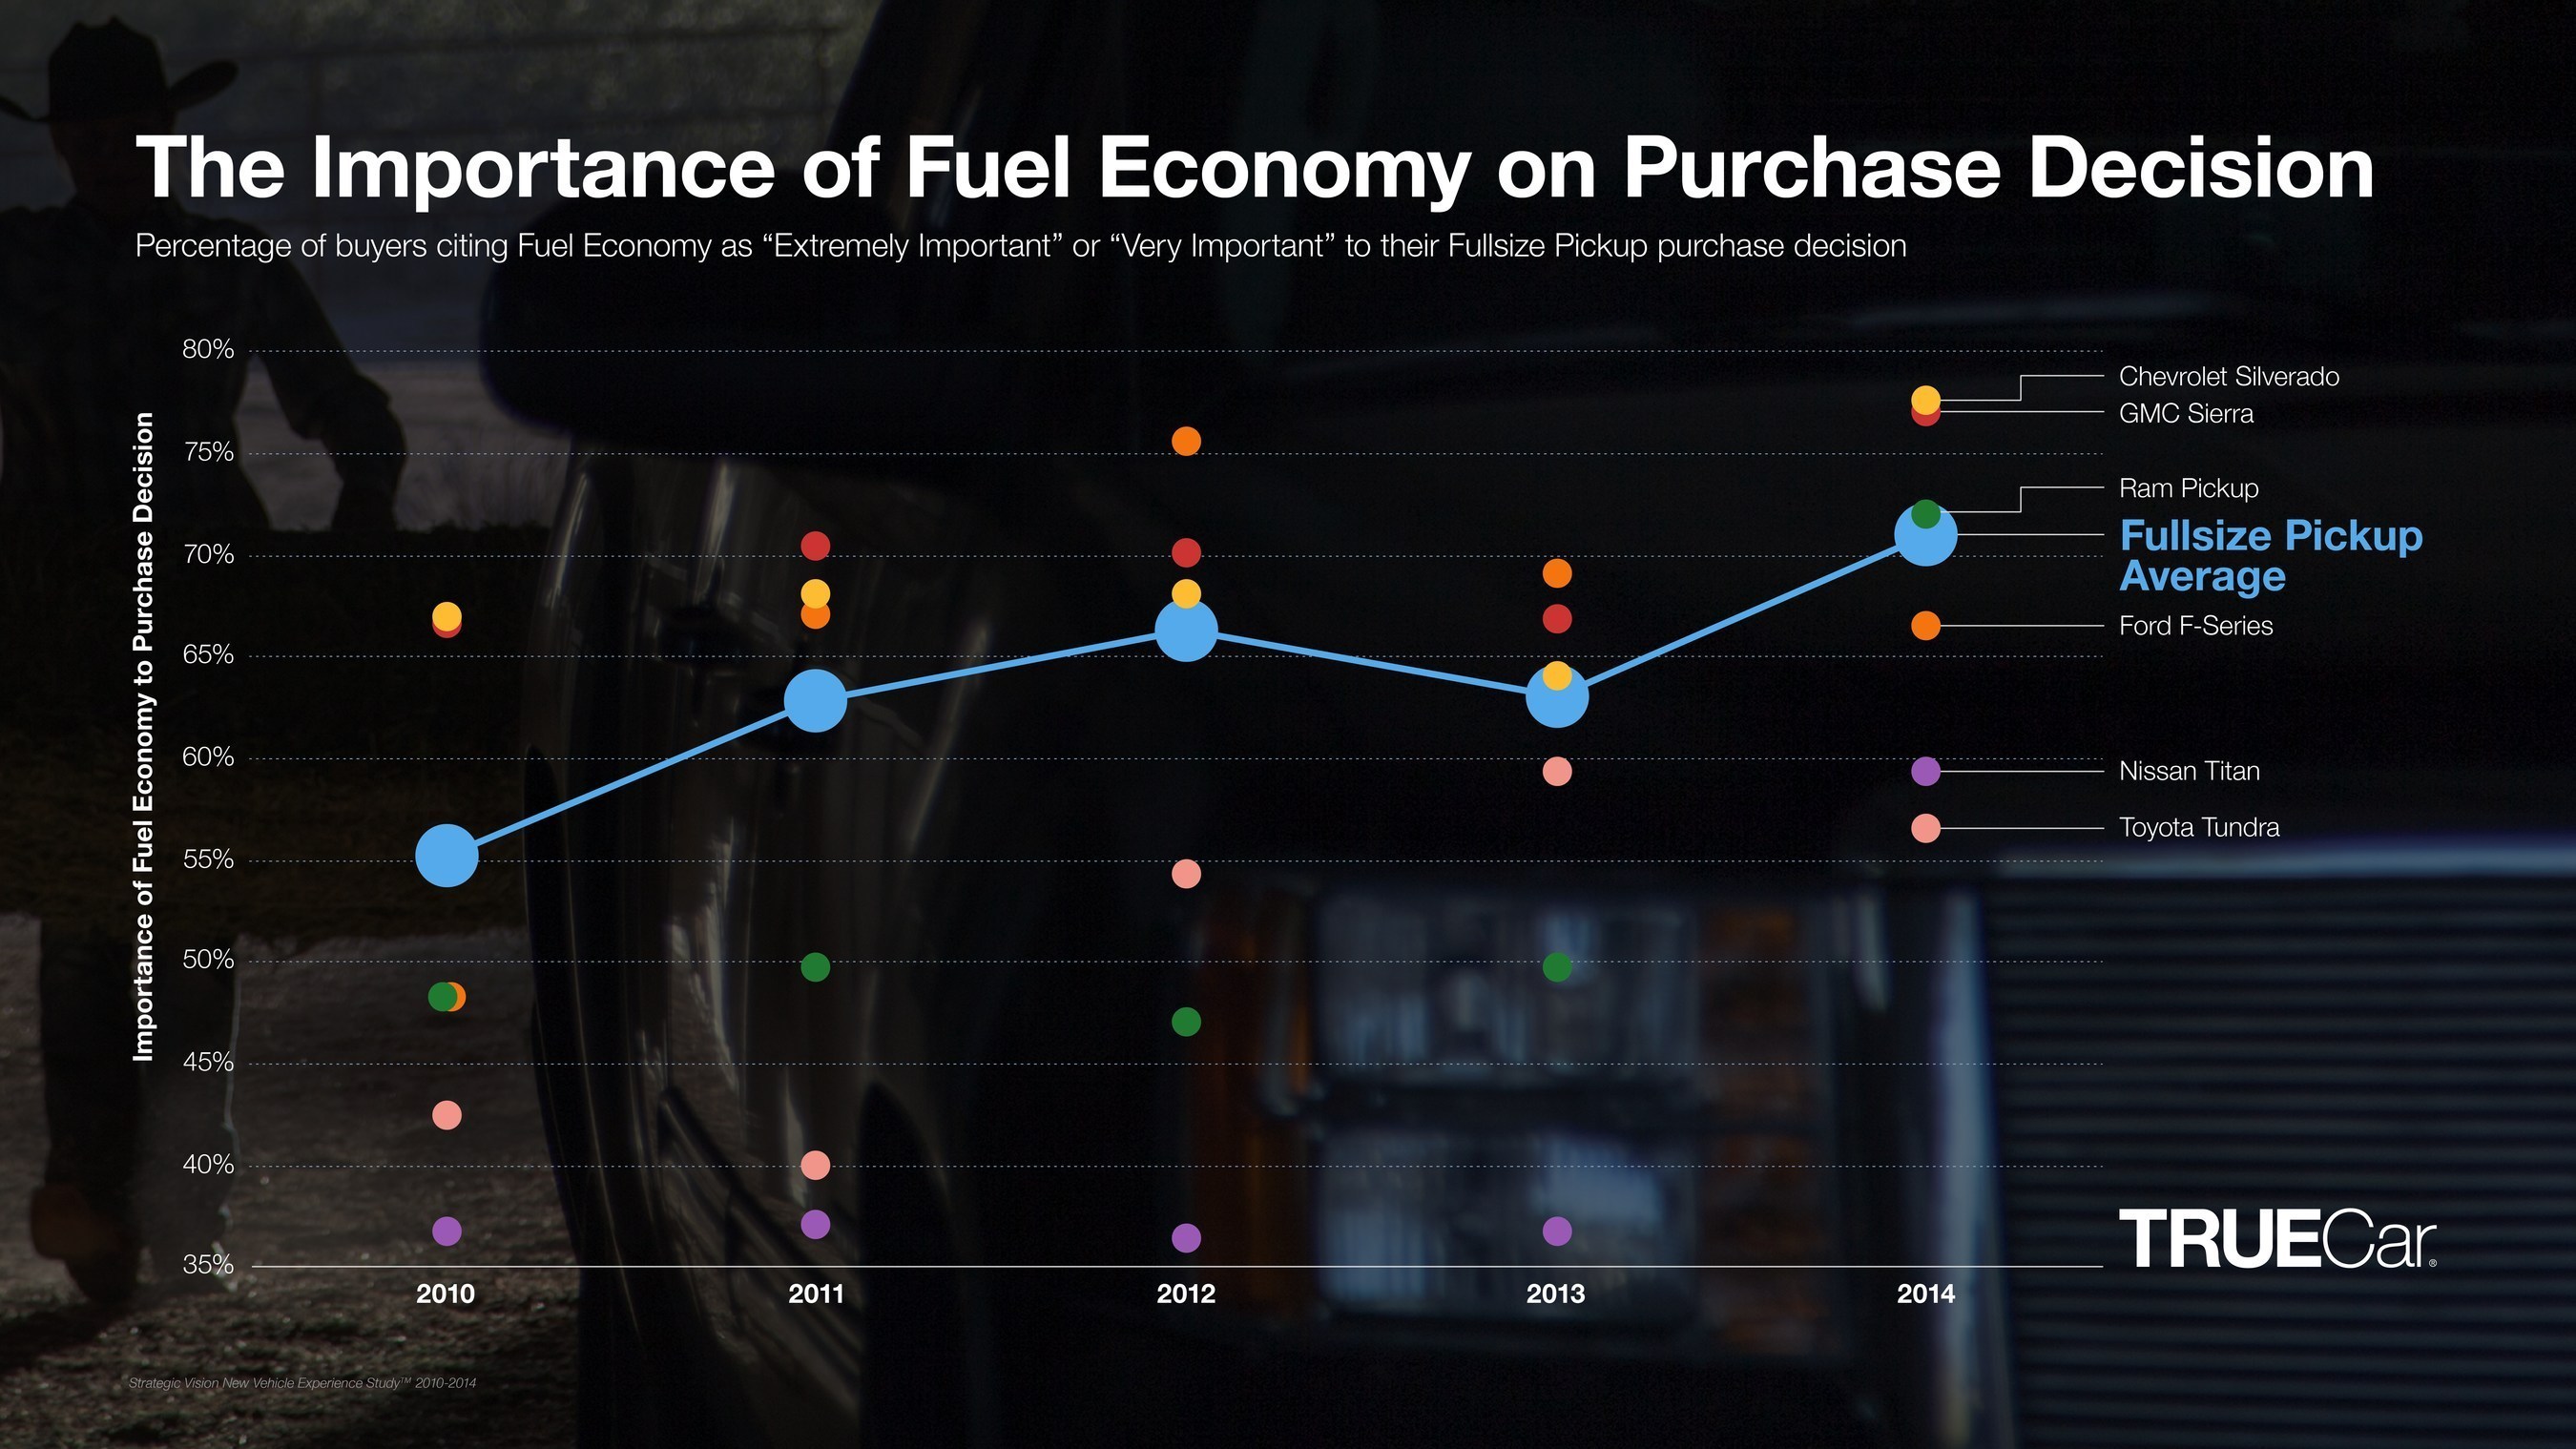 Fuel economy a high purchase consideration for modern truck buyers even as fuel prices drop